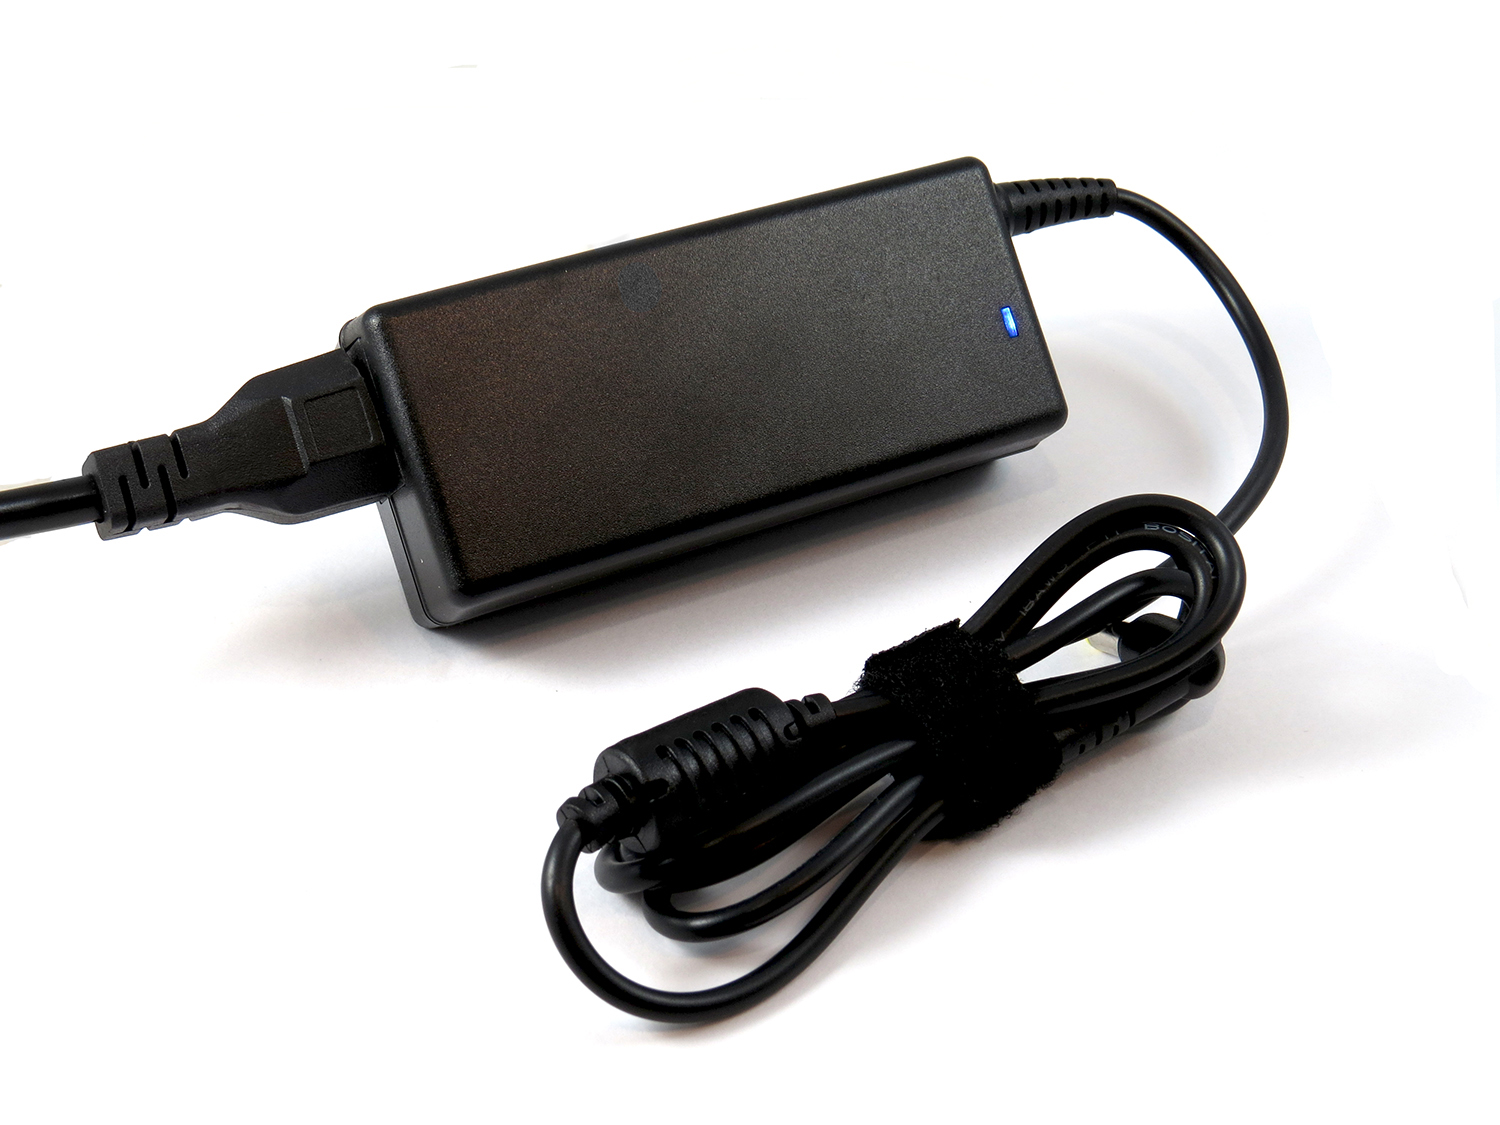 AMSK POWER Ac Adapter for Samsung Series 9 NP900X3E NP900X3B NP900X3C NP900X4B NP900X4D NP900X4C NP900X5N NP900X1A NP900X1B NP900X3A NP900X3D - image 2 of 3